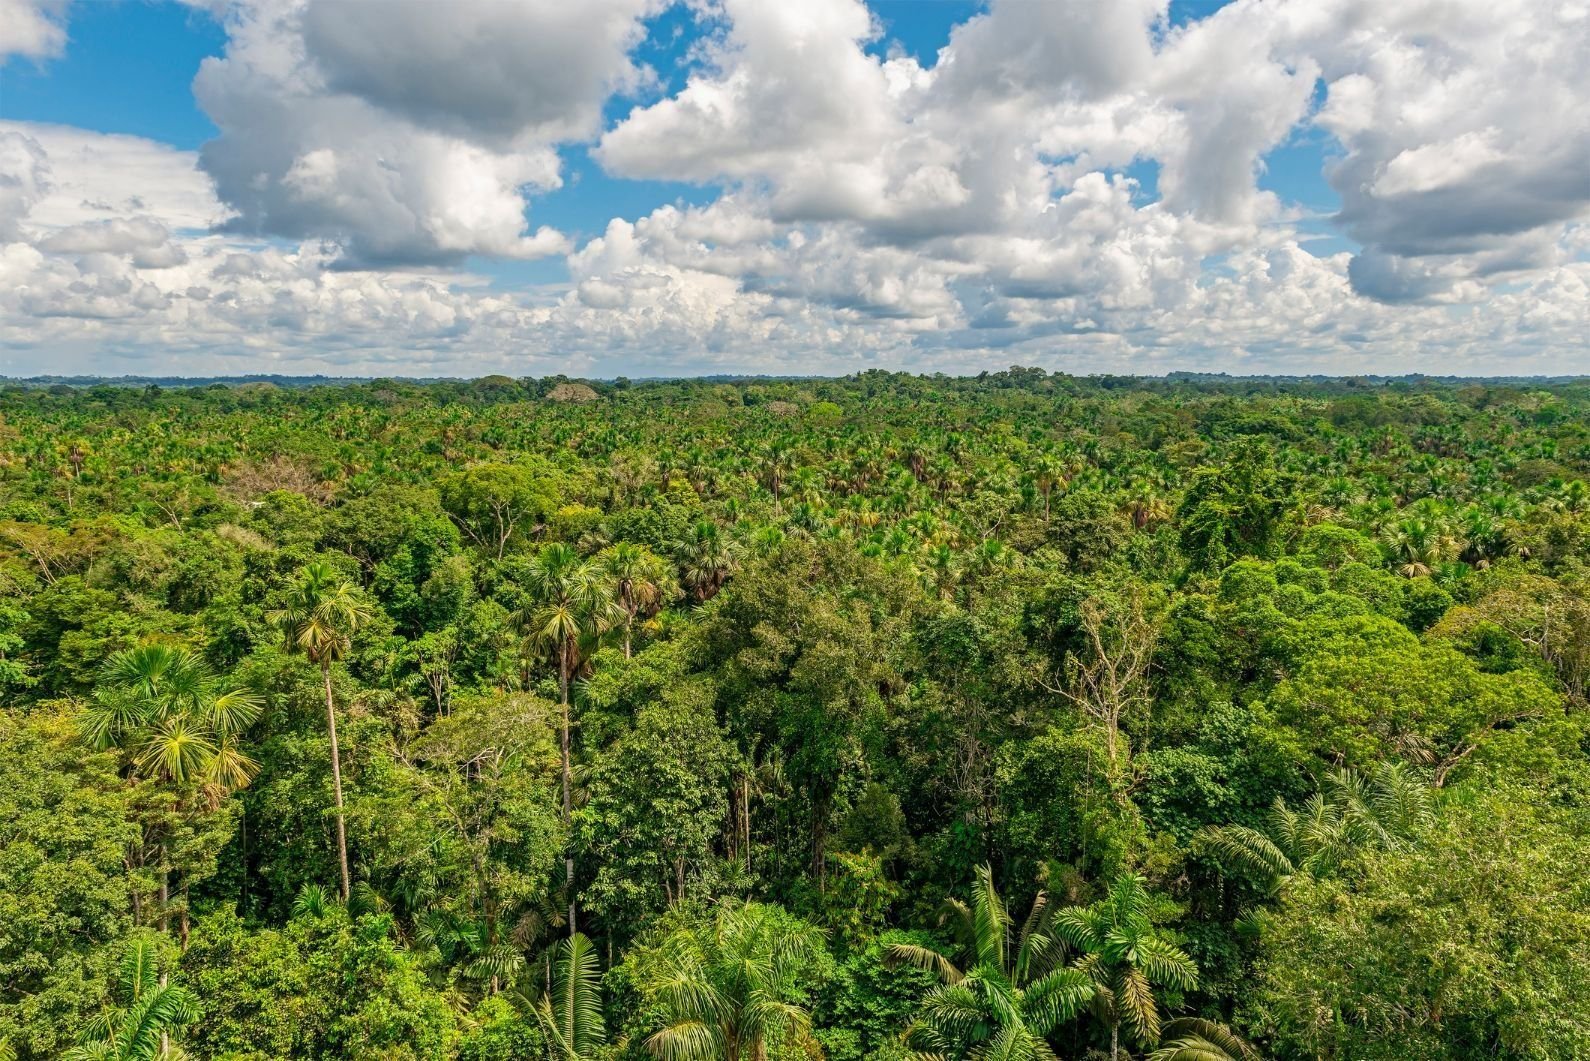 Welcome to Yasuni: One of the Most Biodiverse Places on the Planet